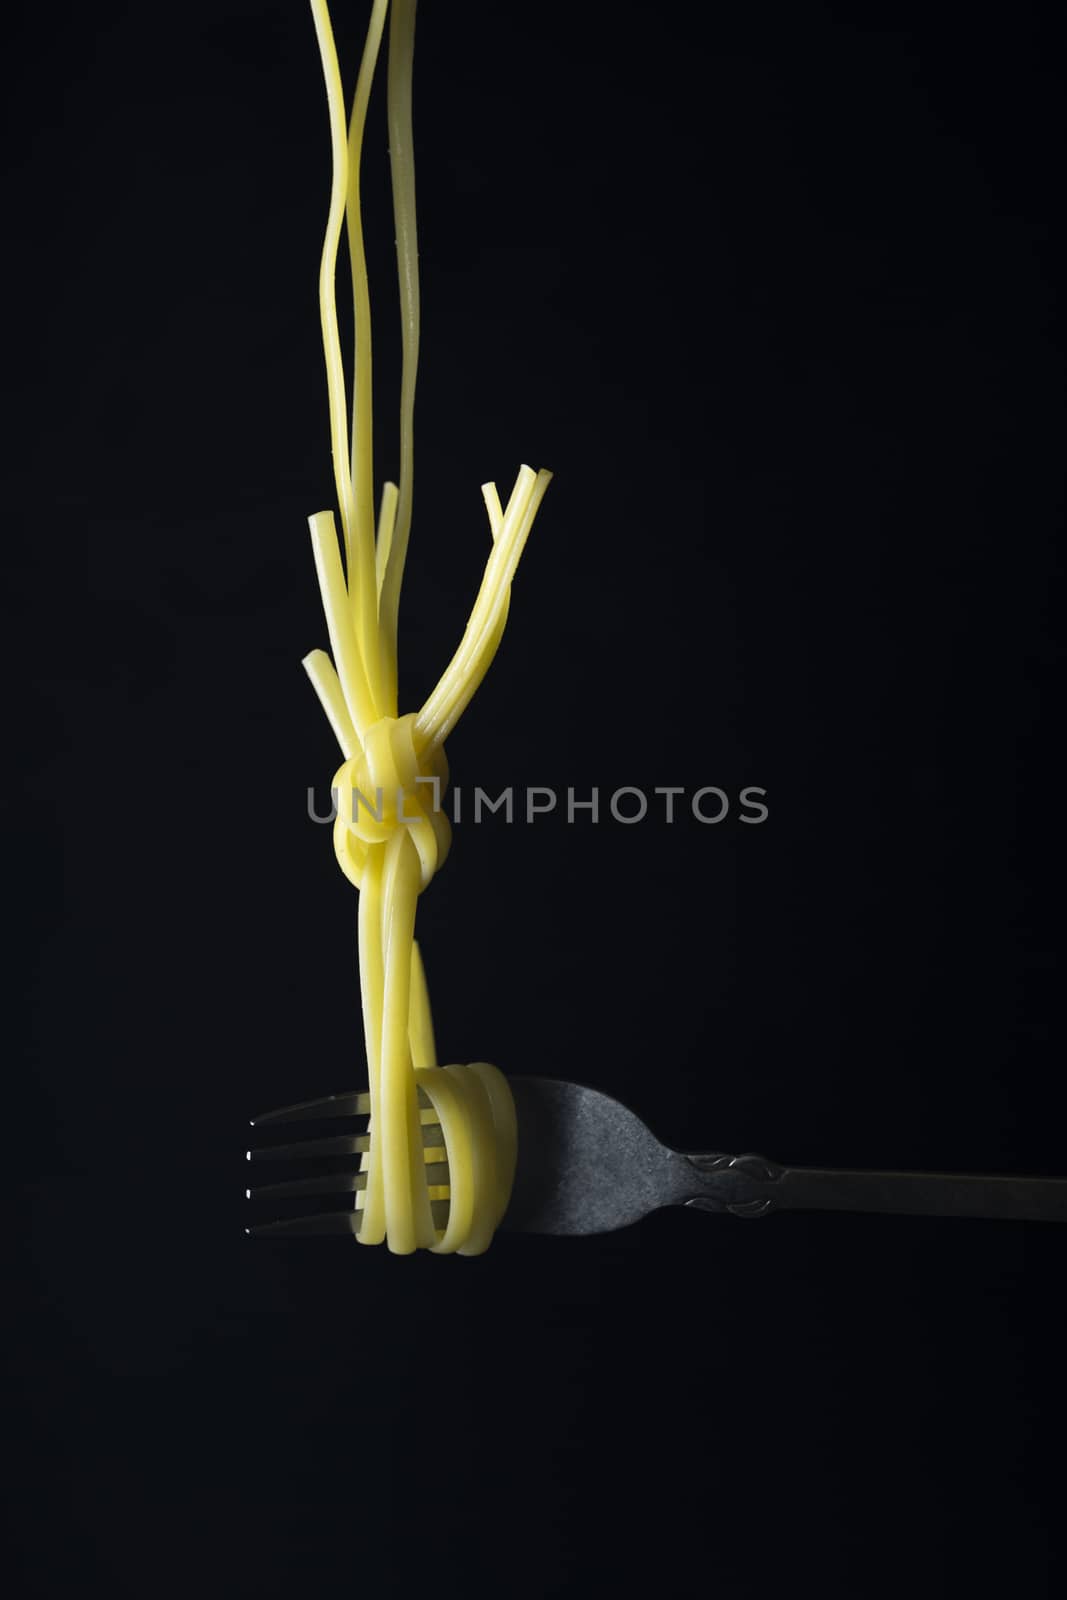 Spaghetti on a fork in front of black background by sashokddt